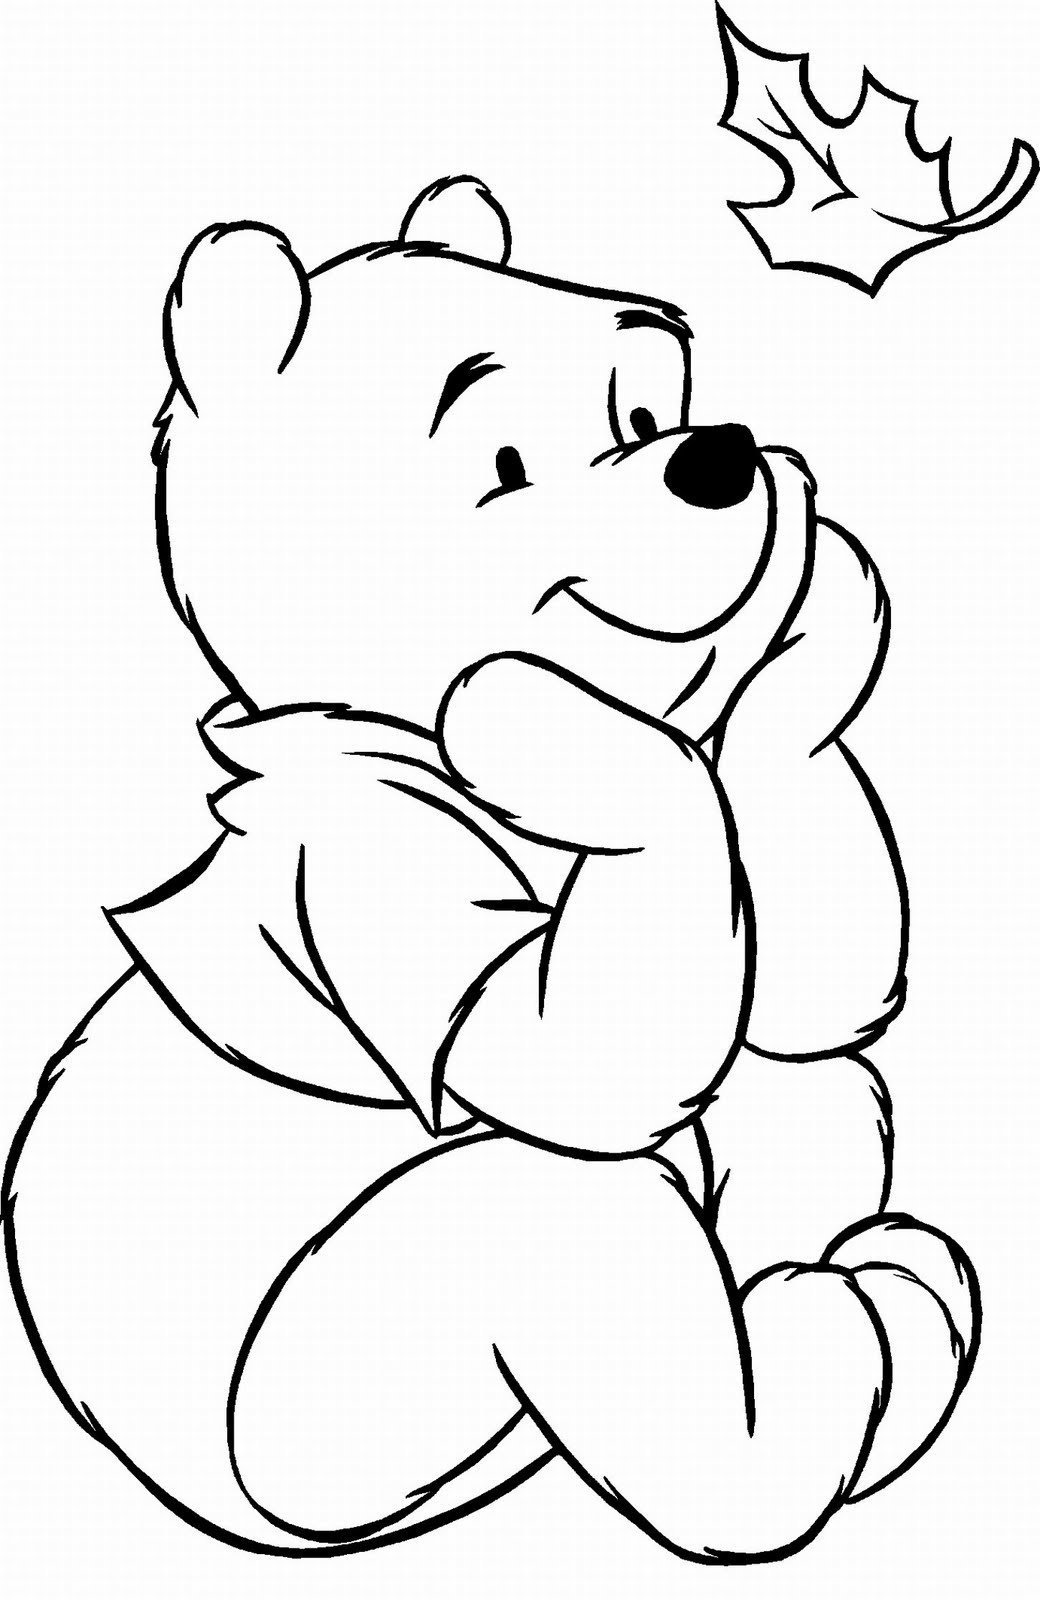 Download Disney Thanksgiving Coloring Pages, Winnie The Pooh Thanksgiving Coloring Printables